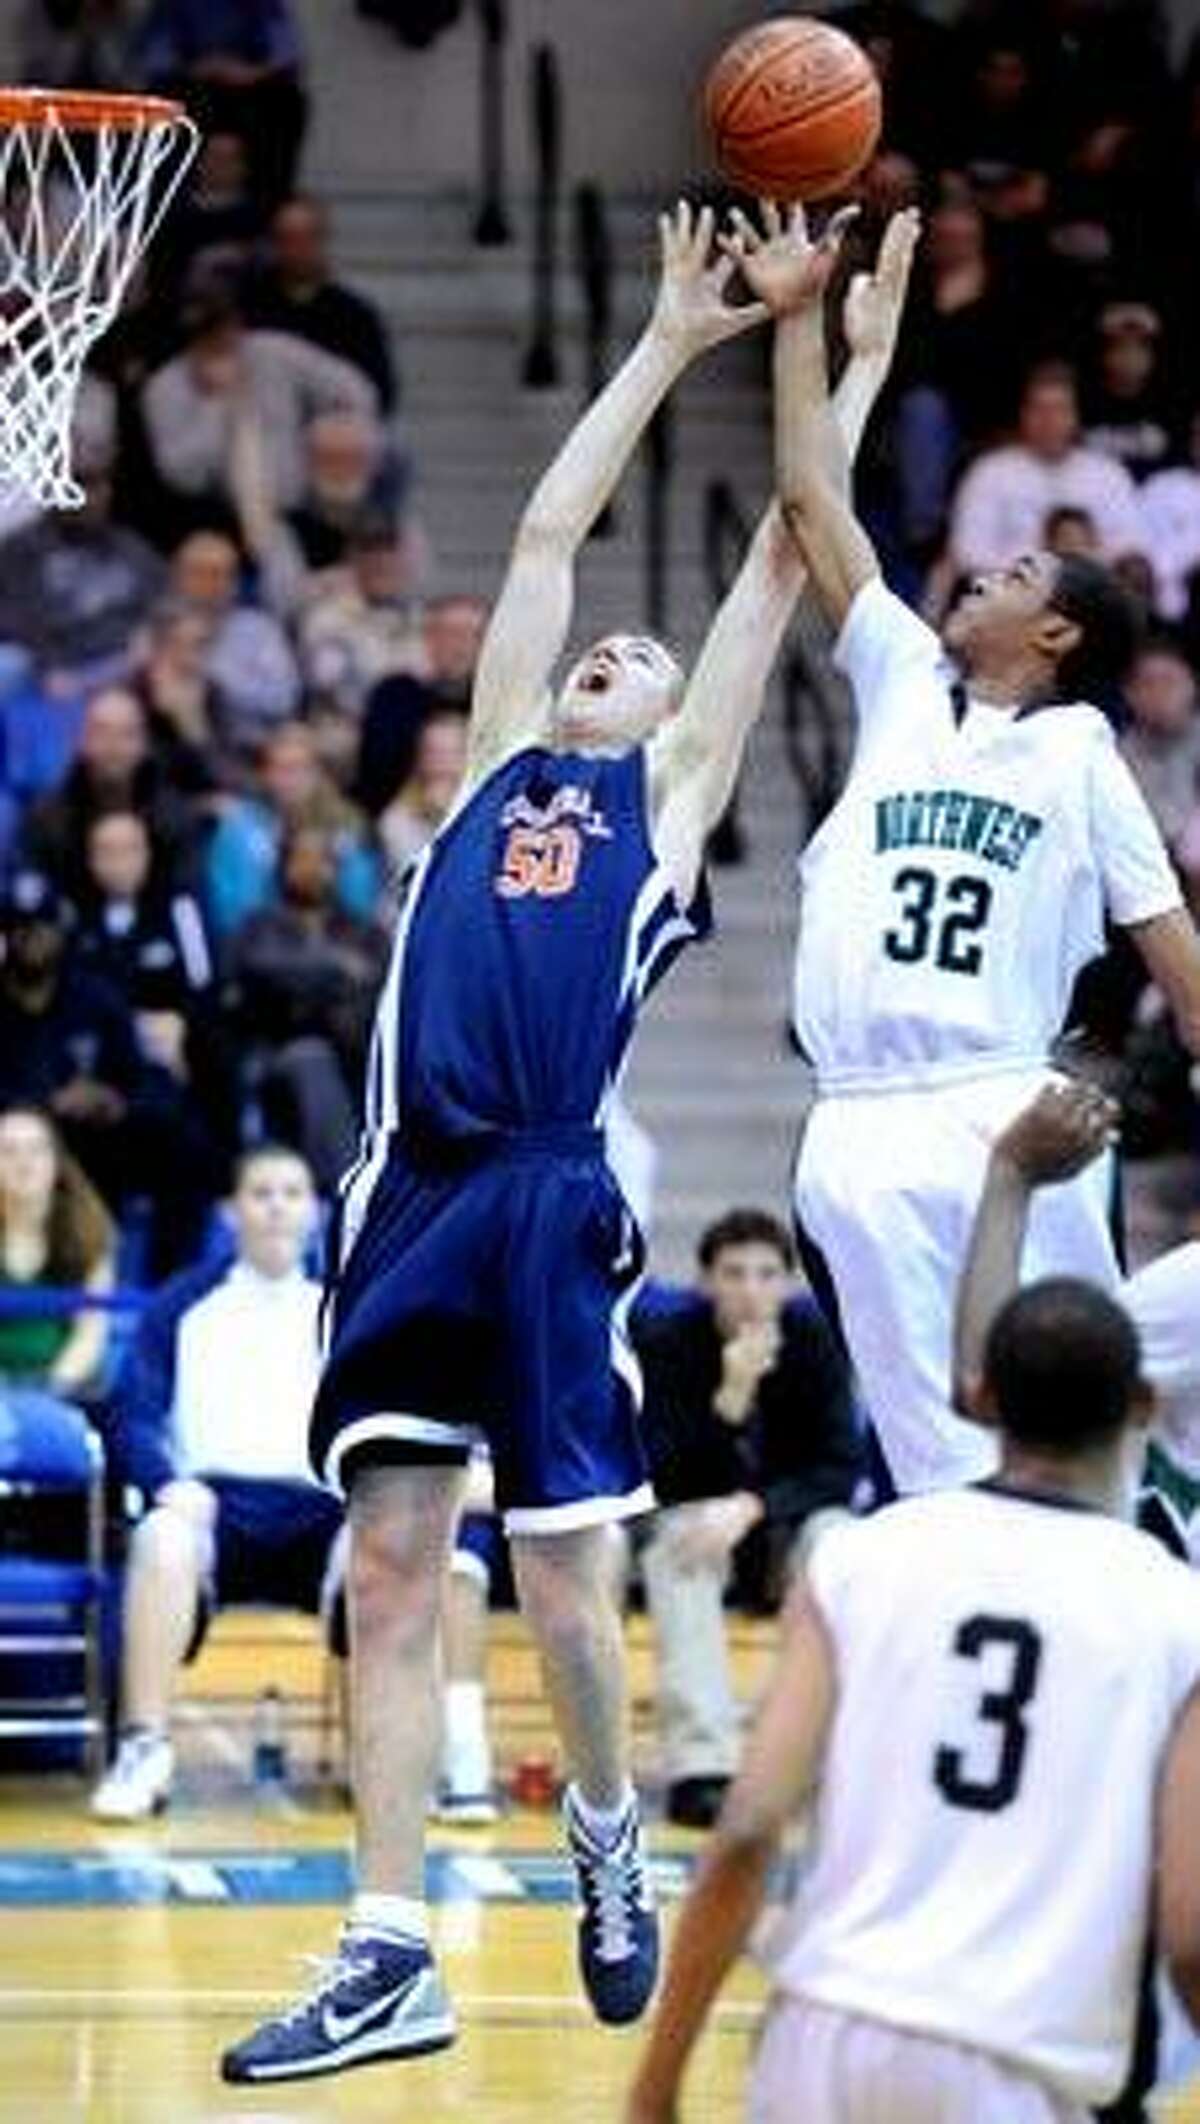 Jason Dempsey (left) of Lyman Hall and Tony Seldon (right) of Northwest Catholic go for a rebound in the second half of their Class L Semifinal game at Central Connecticut State University on 3/16/2011.Photo by Arnold Gold/New Haven Register AG0405E